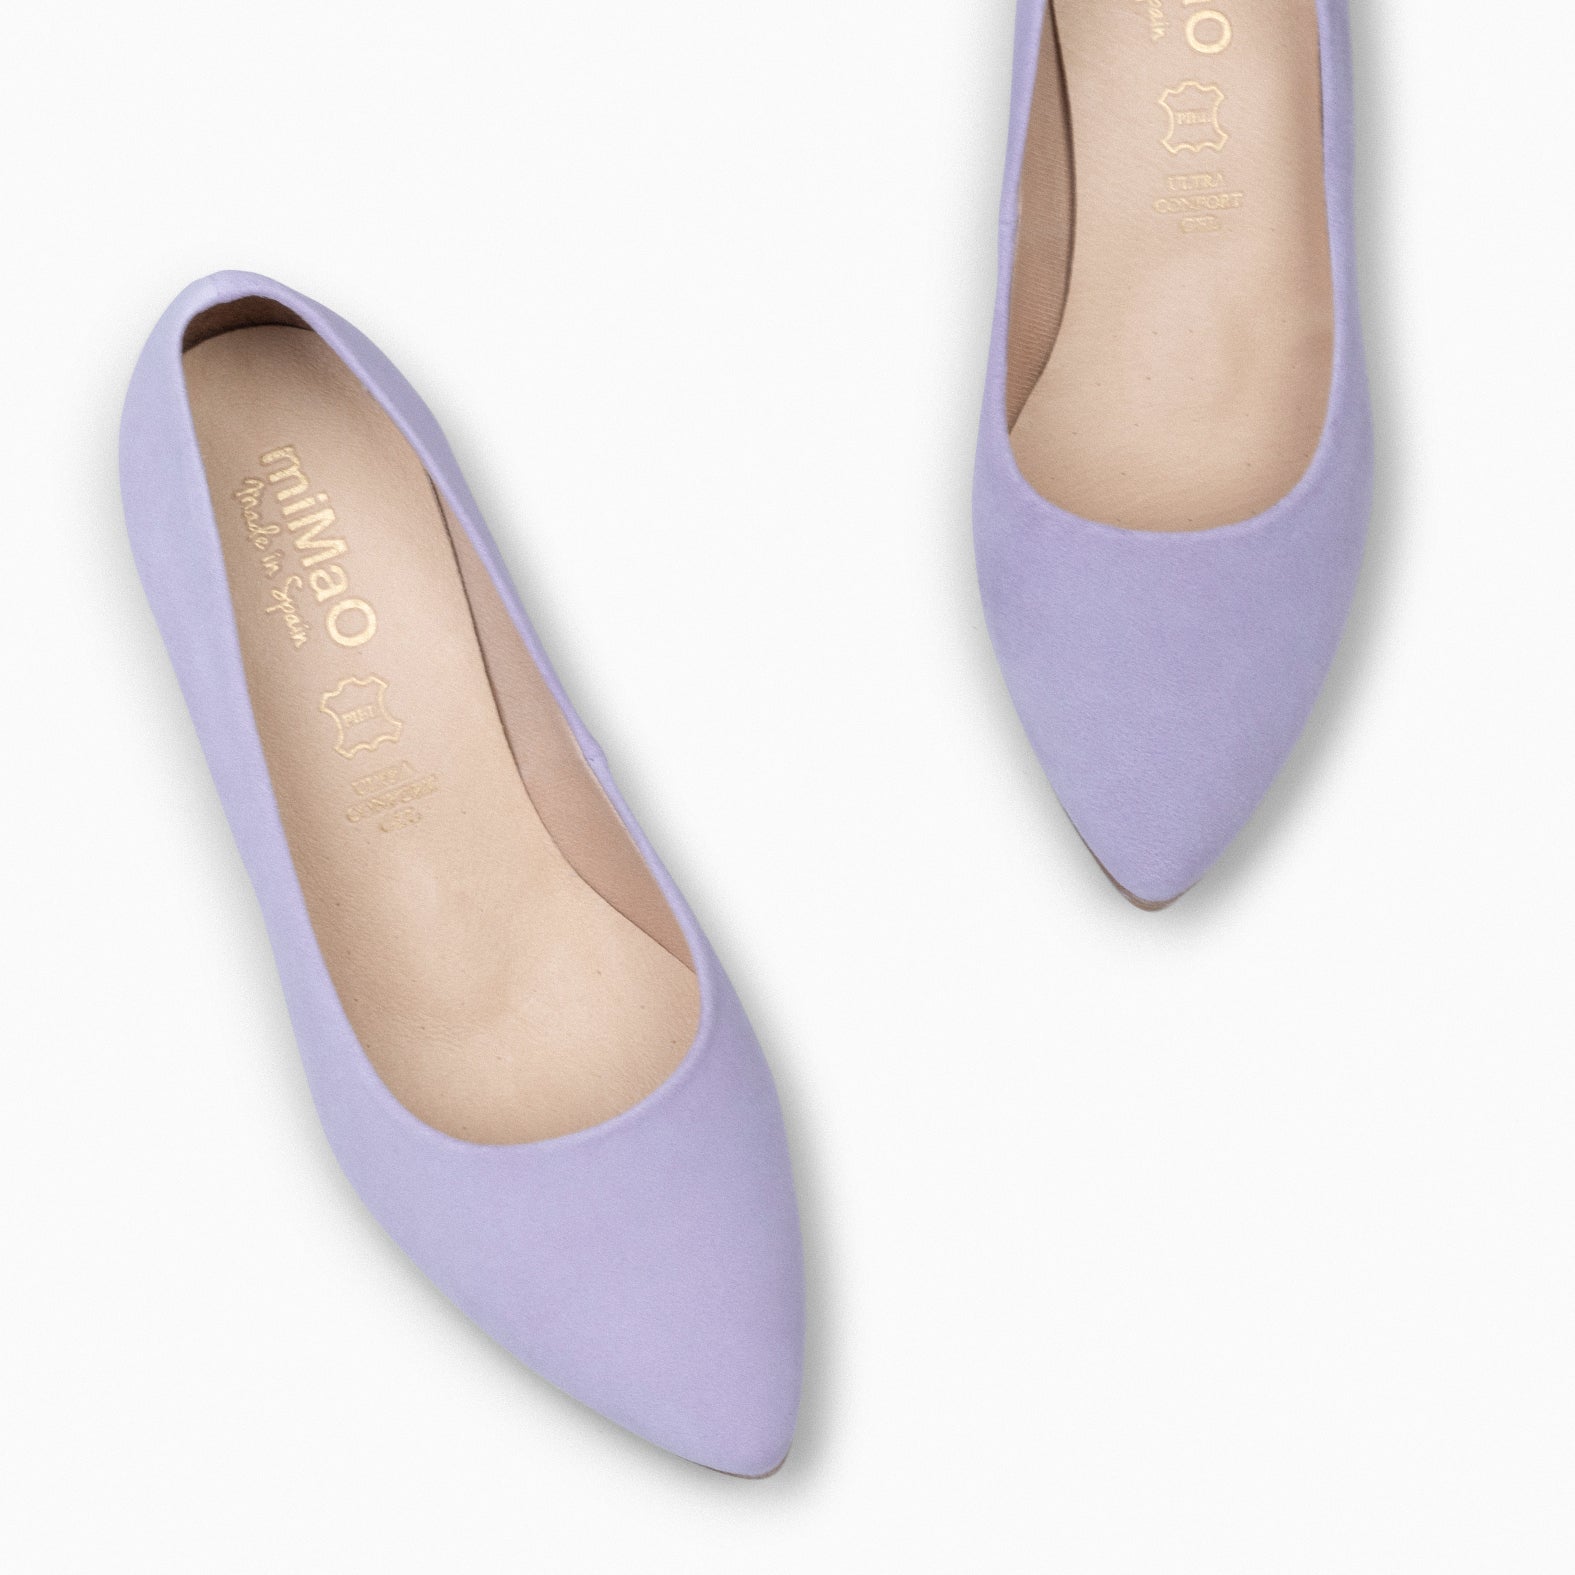 URBAN S – PURPLE Suede Mid-Heeled Shoes 